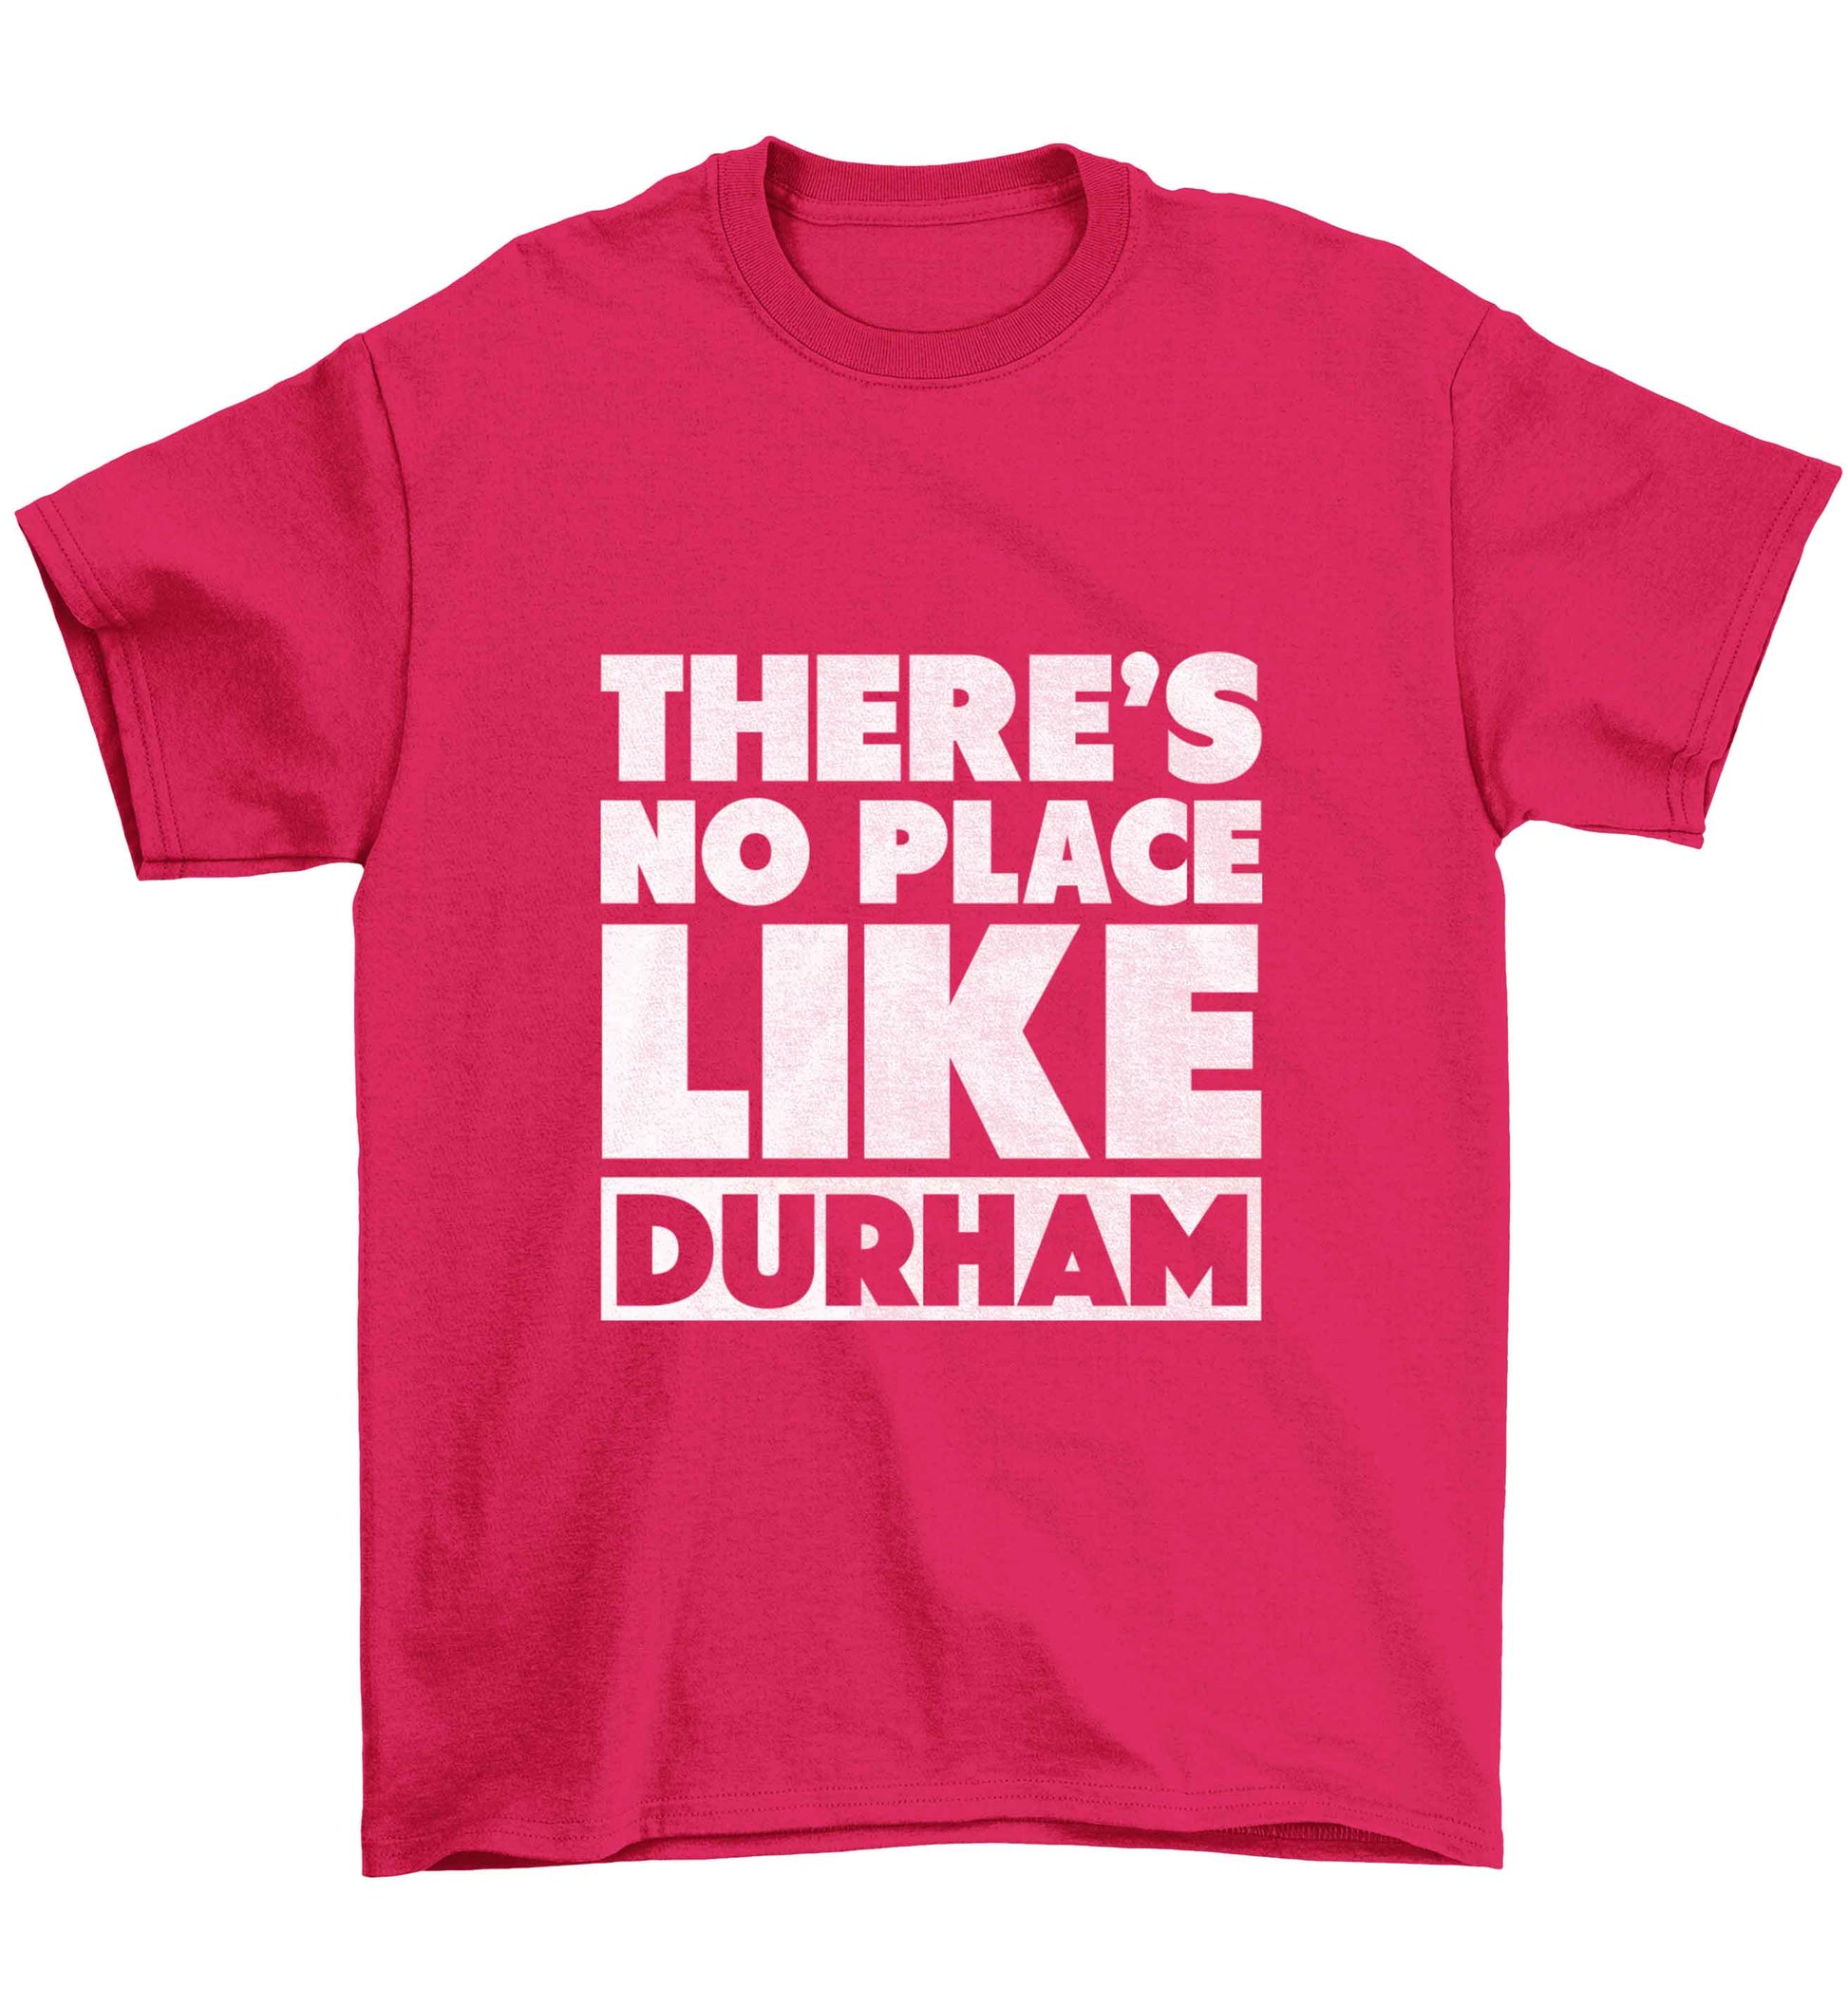 There's no place like Durham Children's pink Tshirt 12-13 Years